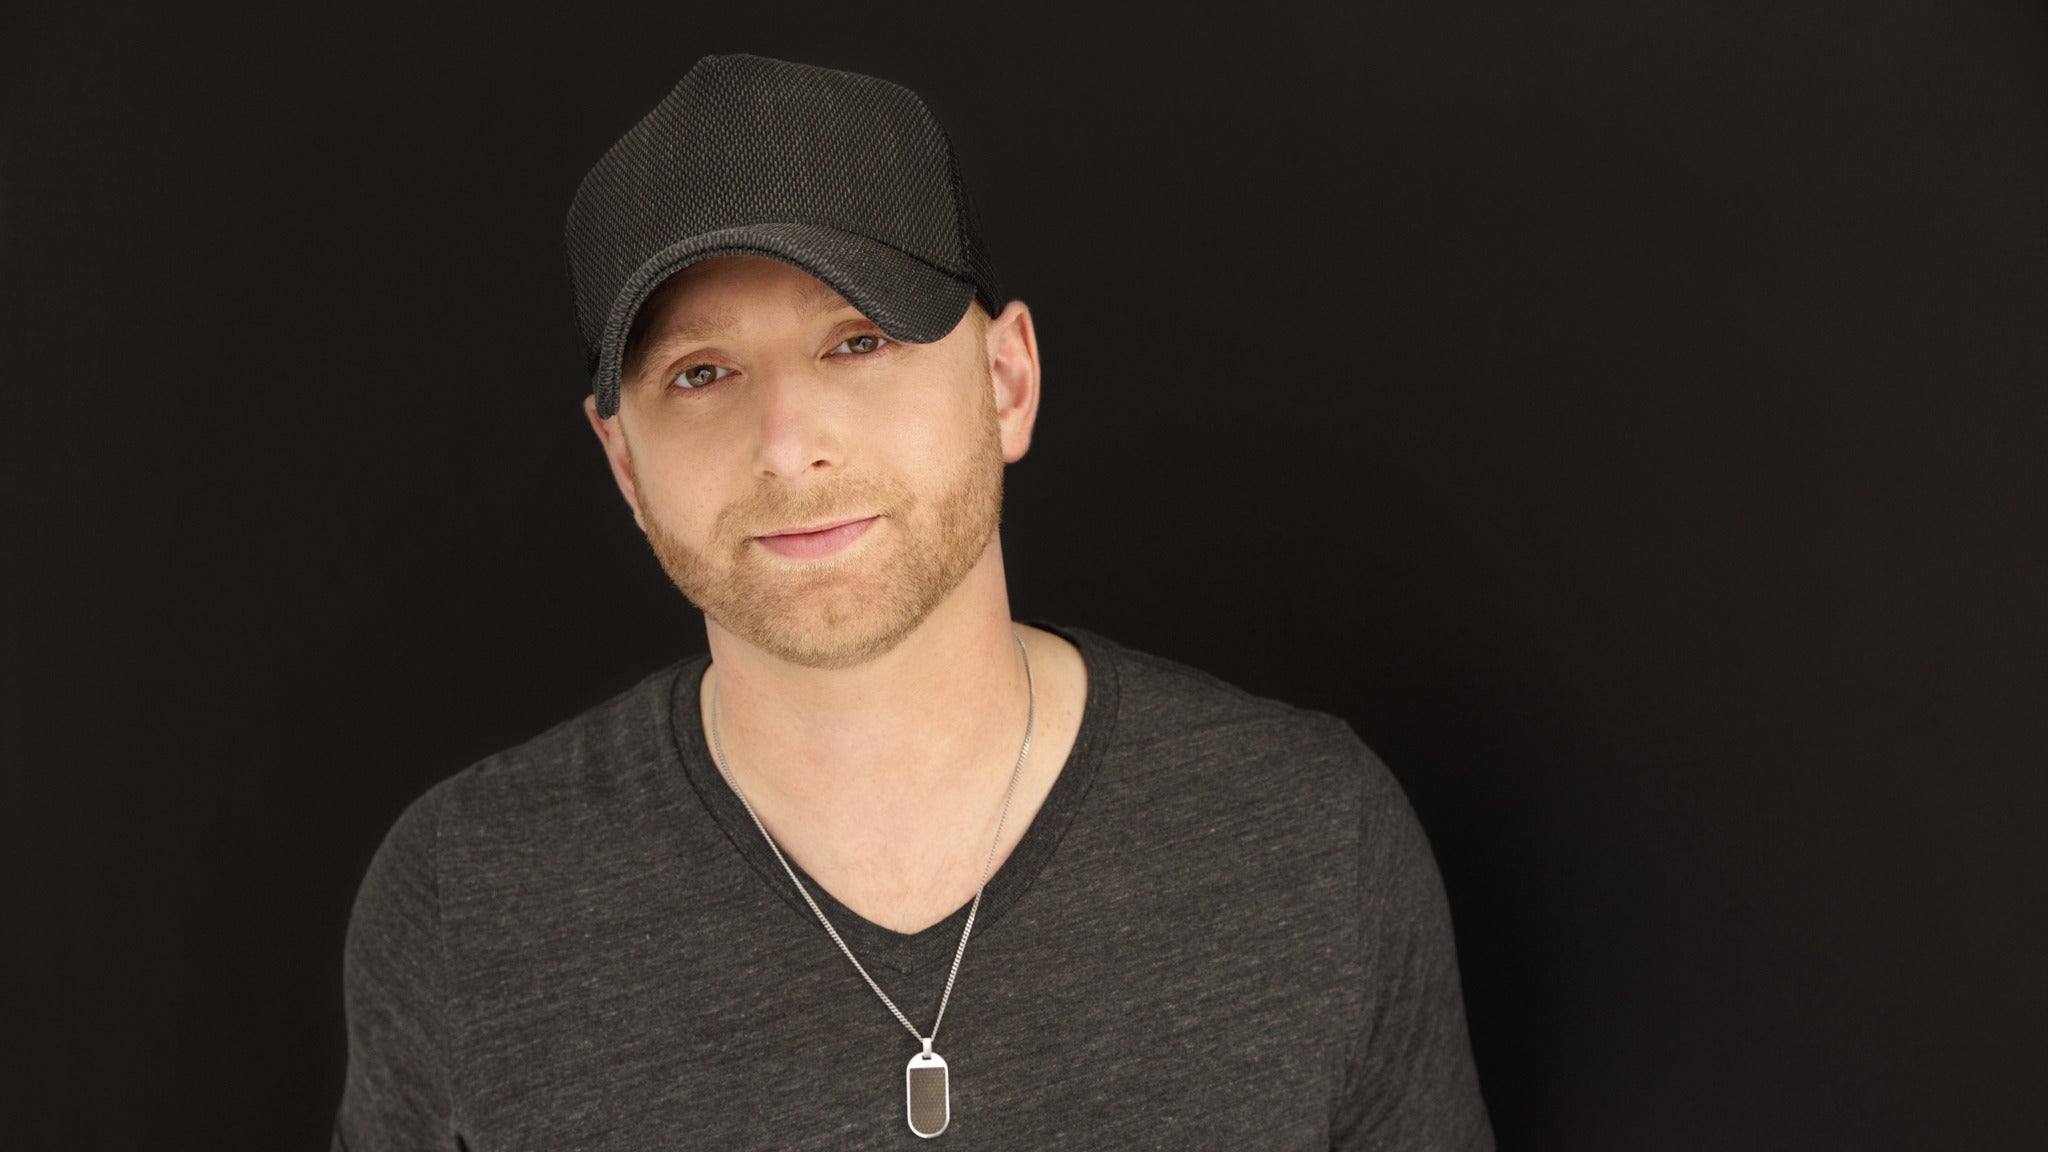 Tim Hicks Wreck This Town World Tour in Saskatoon promo photo for Live Nation presale offer code